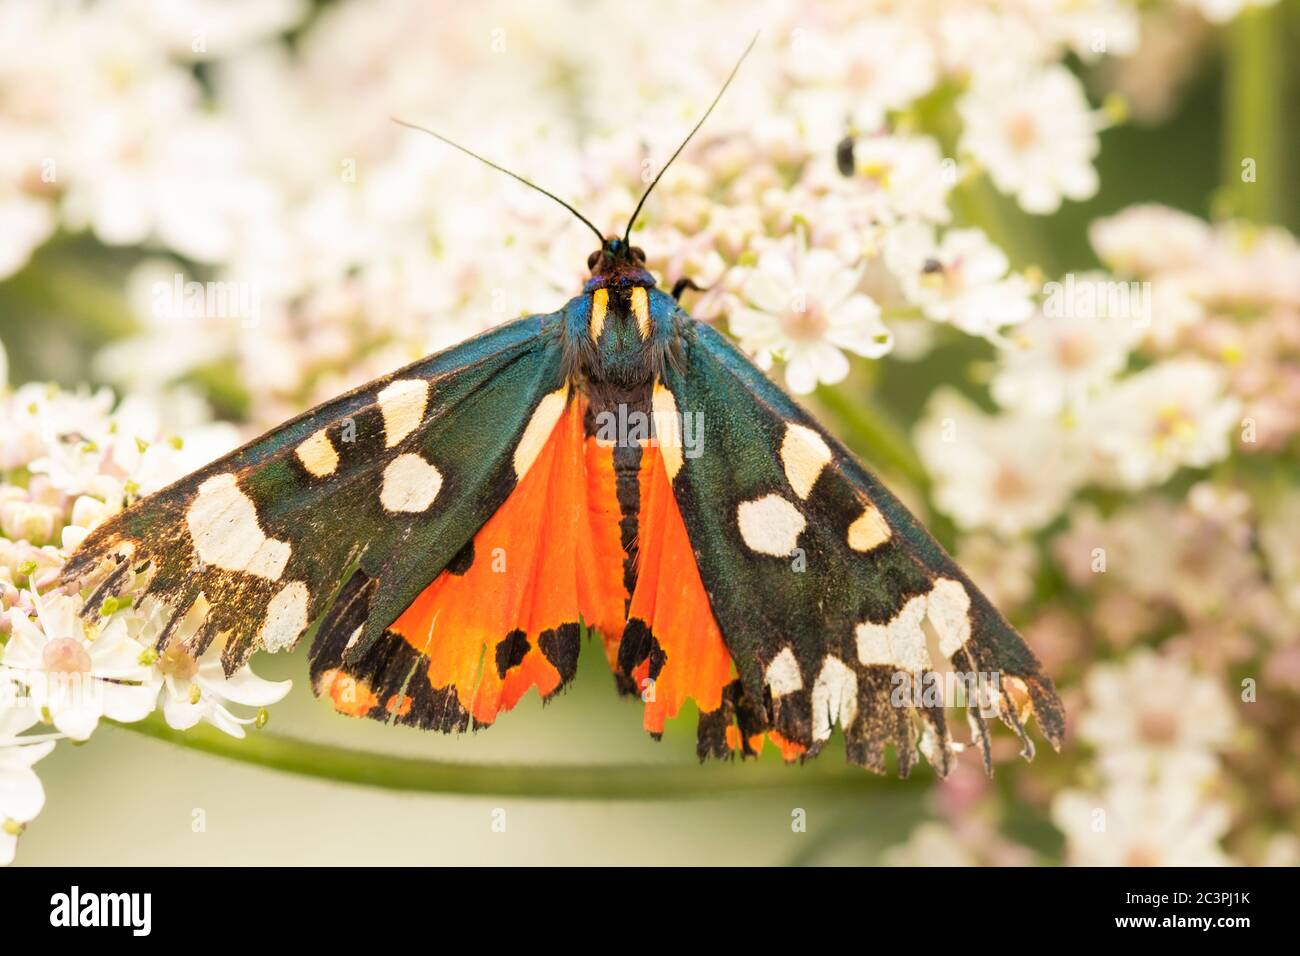 Scarlet Tiger Moth, callimorpha Dominula, perched on a flower in the British countryside, looking rather worse for wear Stock Photo